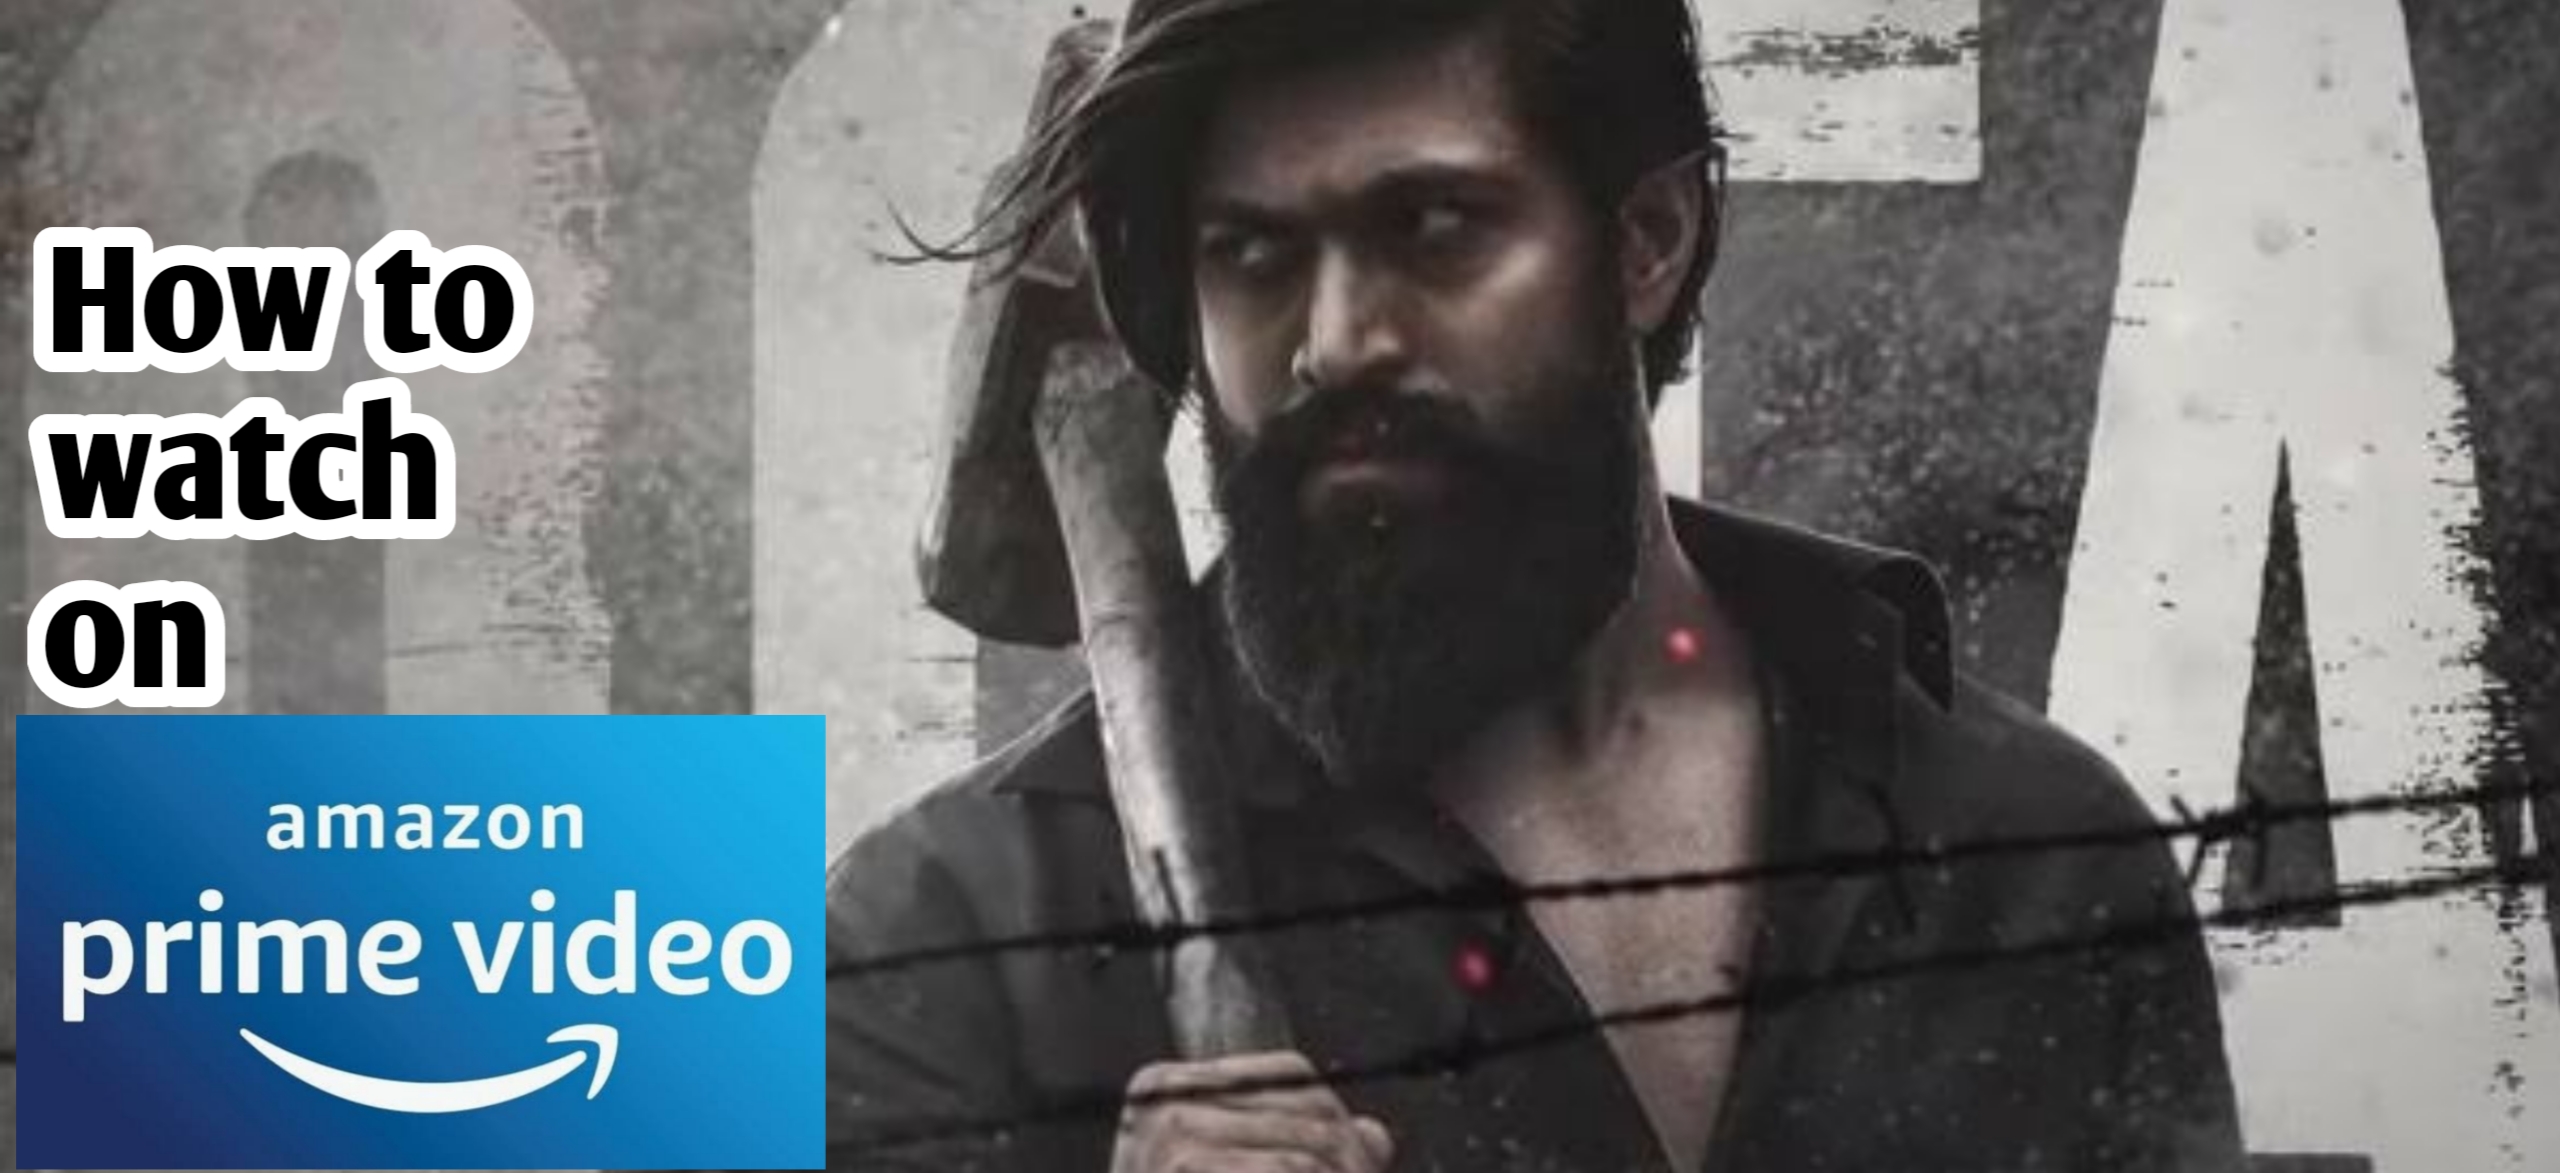 kgf chapter 2 on amazon prime, Kgf chapter 2 full movie free download, Kgf chapter to by netflix, Kgf chapter to watch online free, kgf chapter 2 full